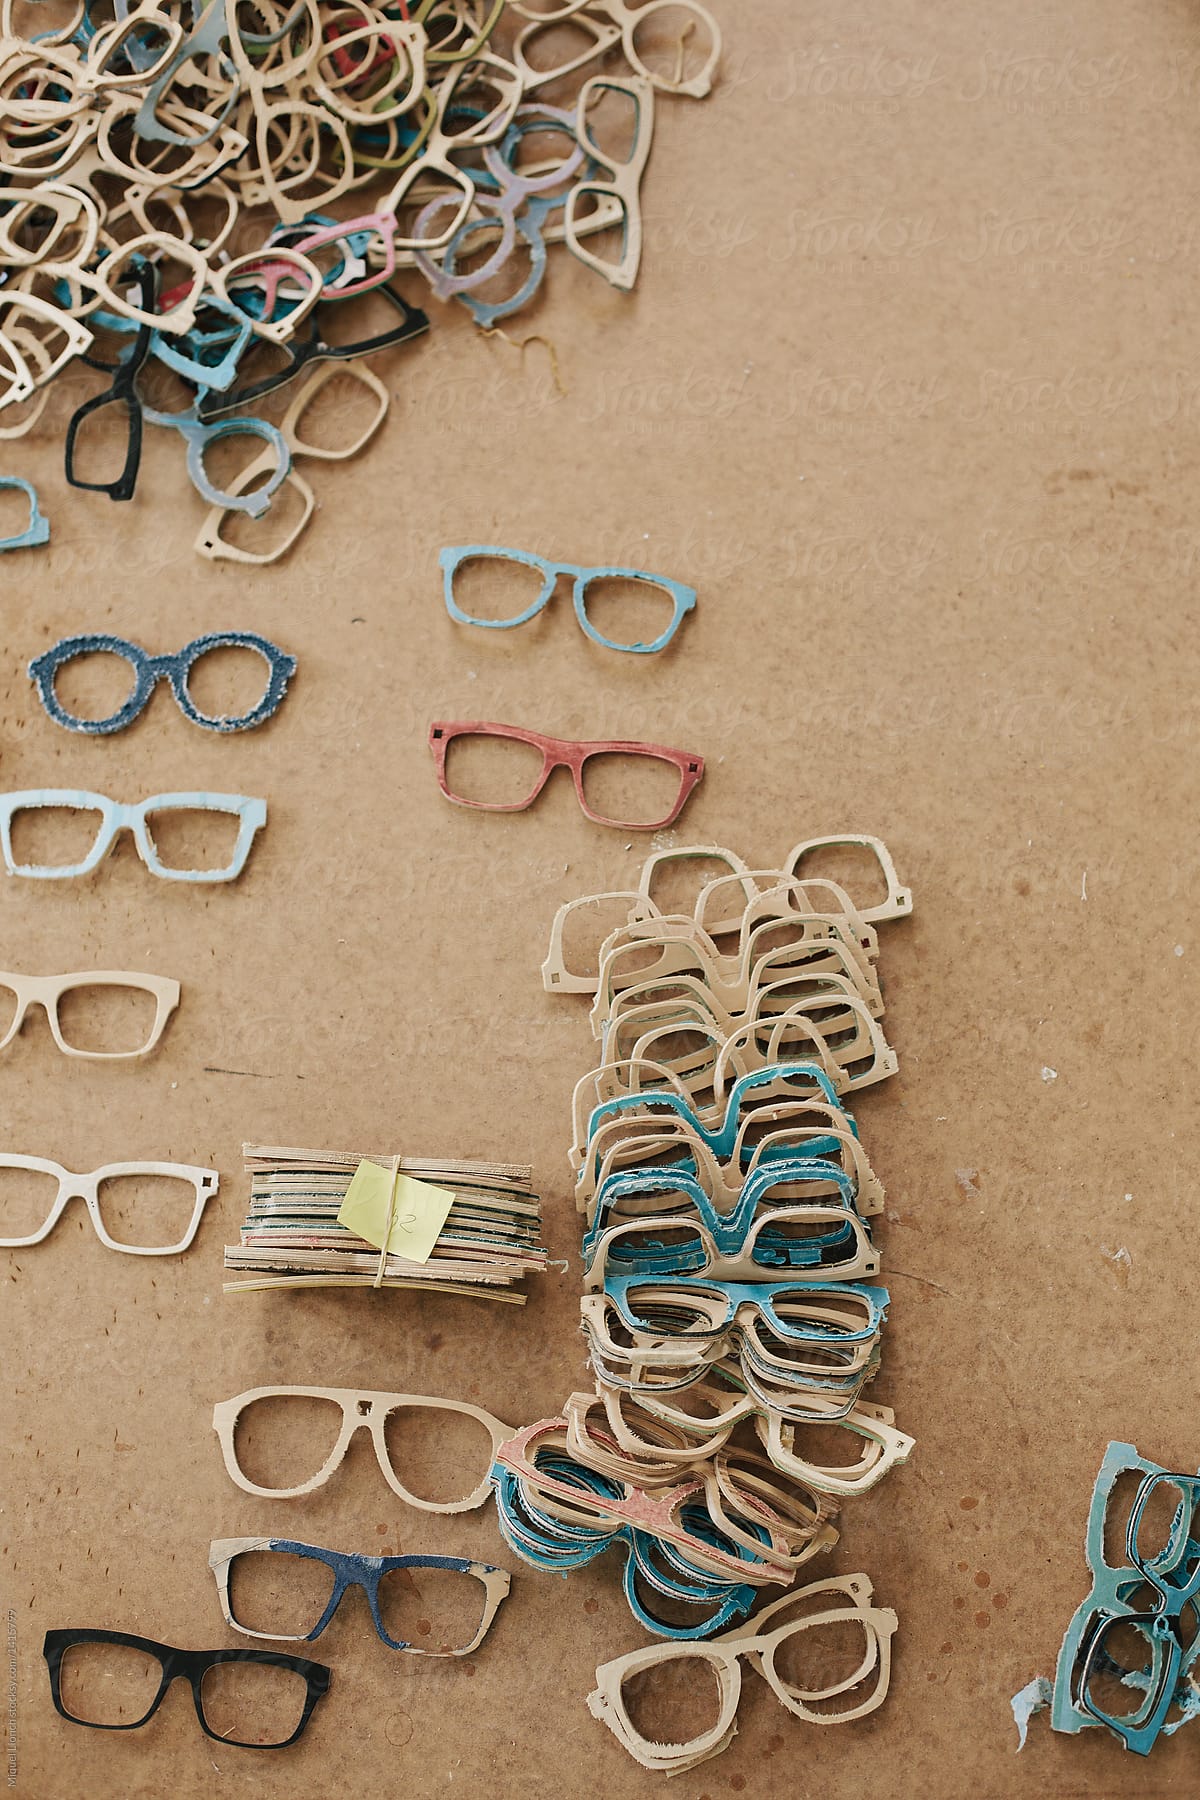 Handmade eyeglasses frames stacked on a wooden table